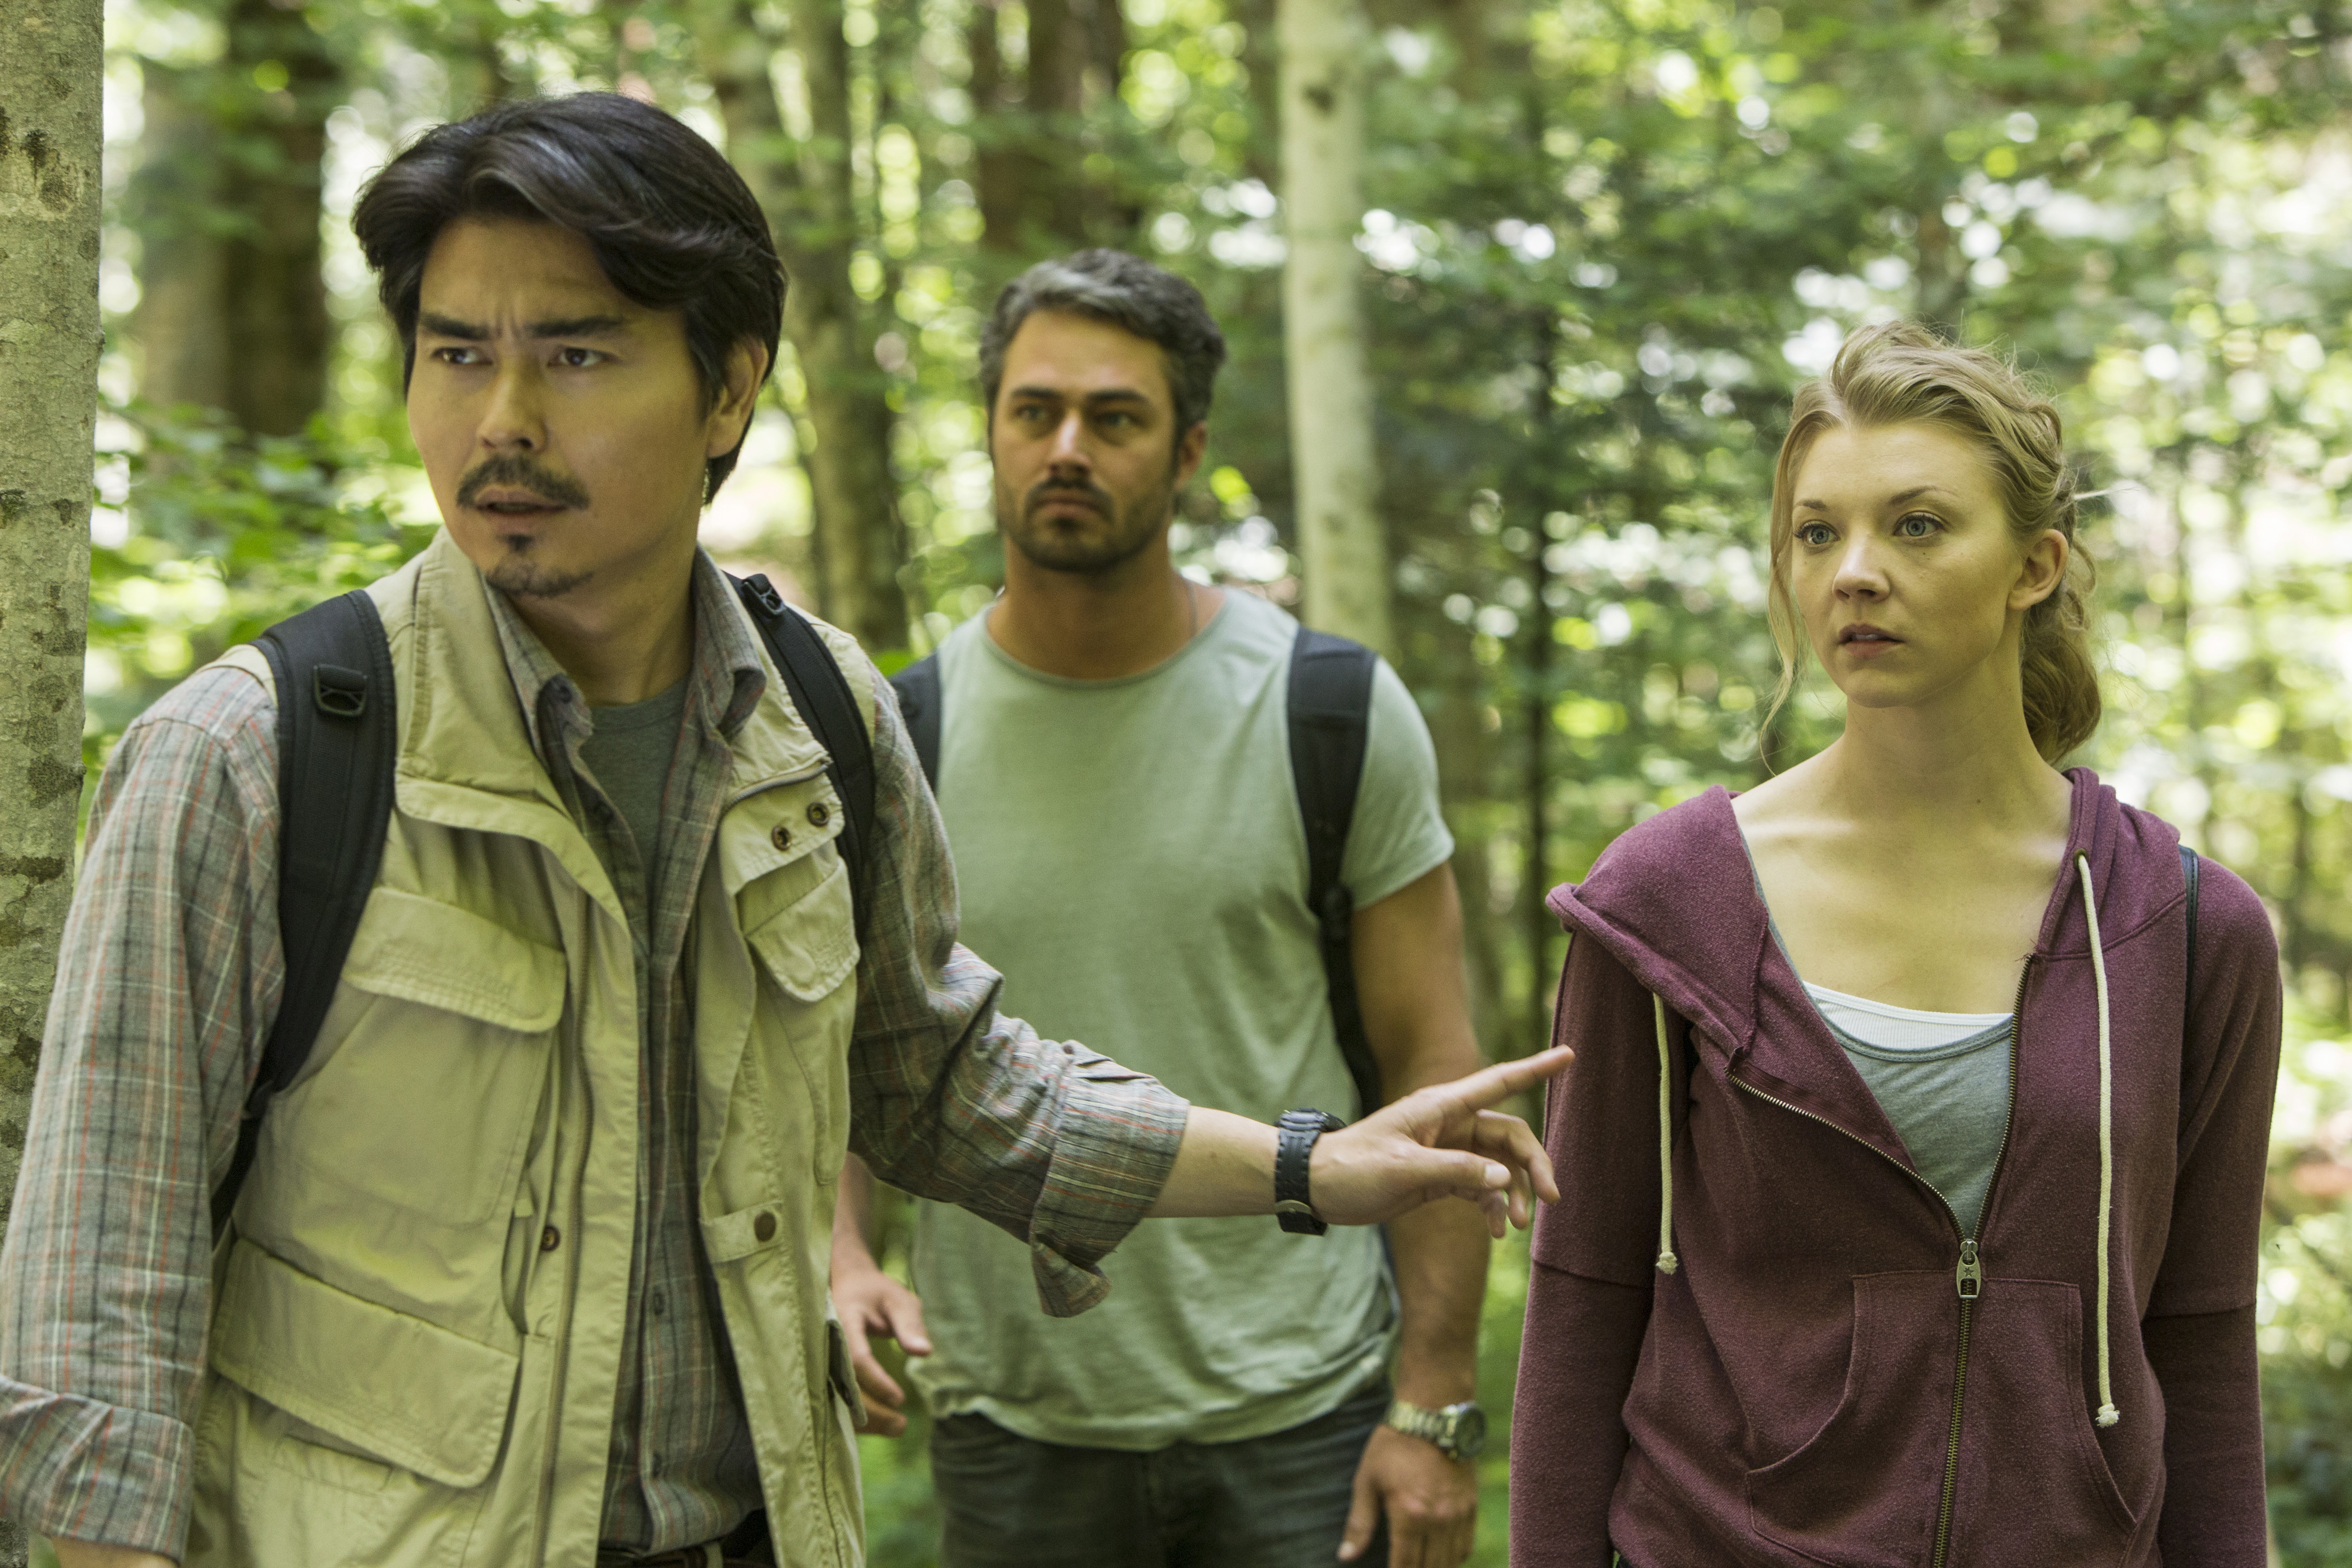 (L to R) Yukiyoshi Ozawa as Michi, Taylor Kinney as Aiden and Natalie Dormer as Sara Price in Jason Zada’s THE FOREST, a Gramercy Pictures release. Credit : James Dittiger / Gramercy Pictures